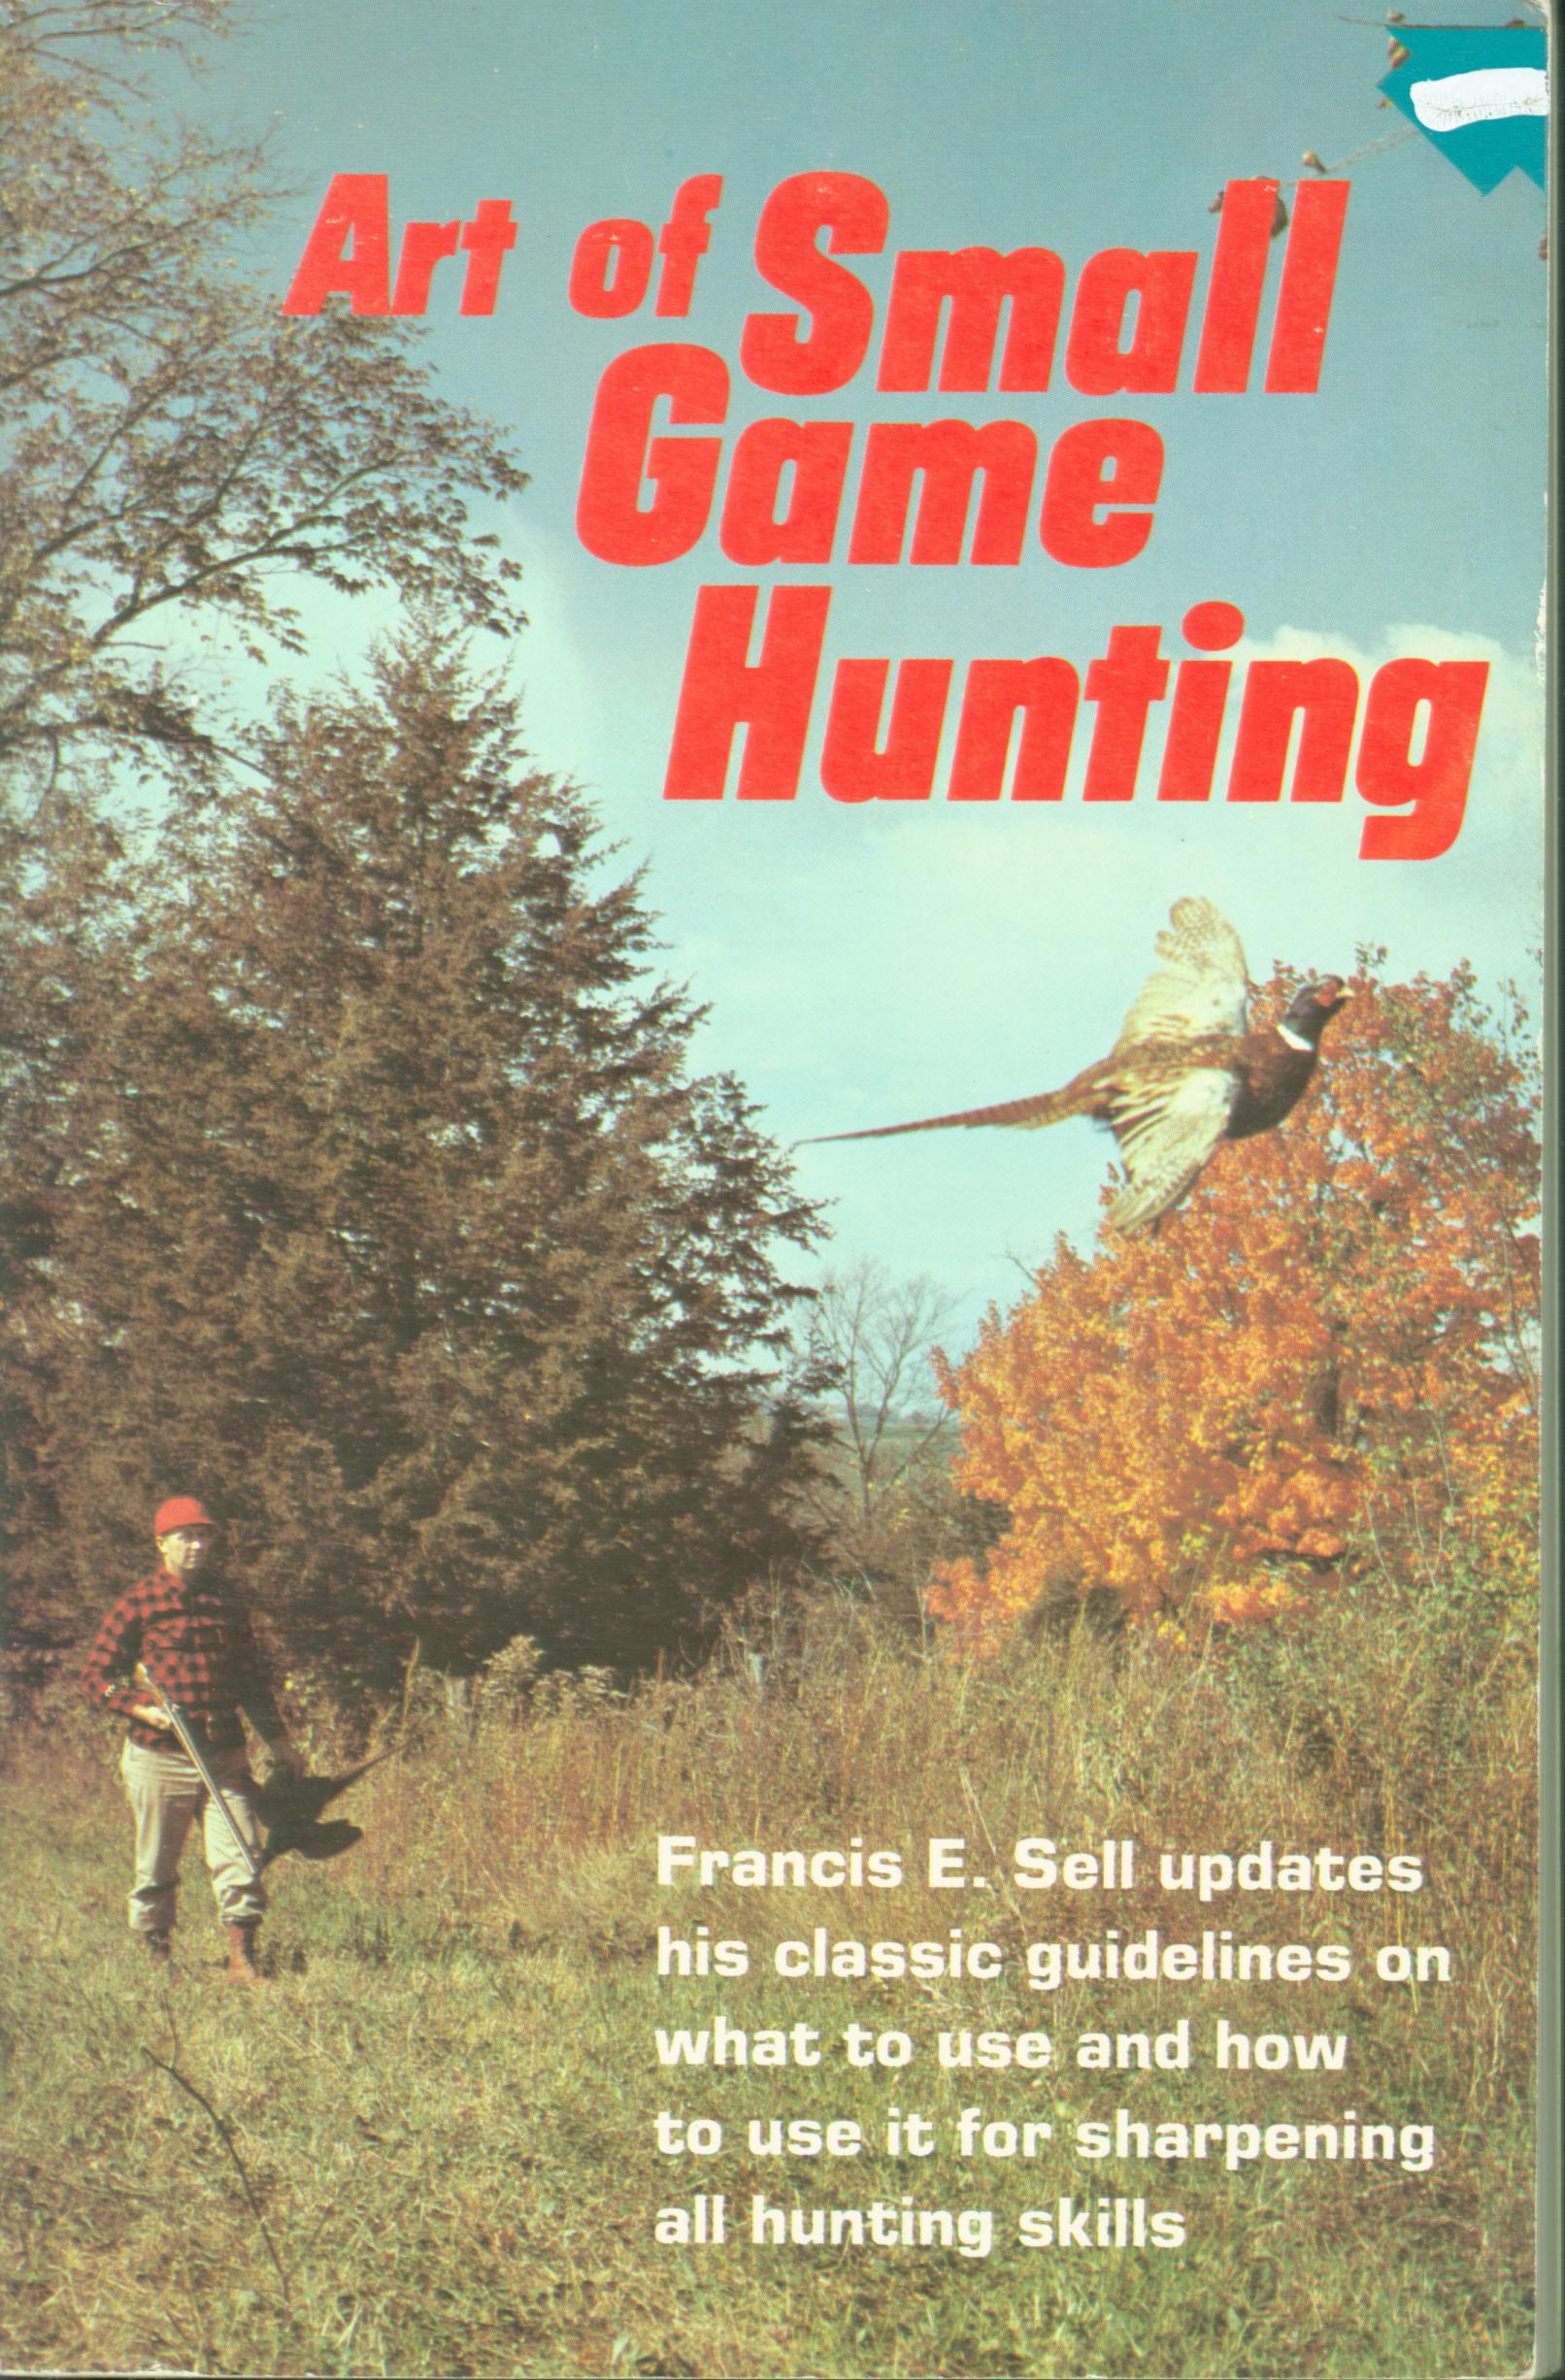 ART OF SMALL GAME HUNTING.